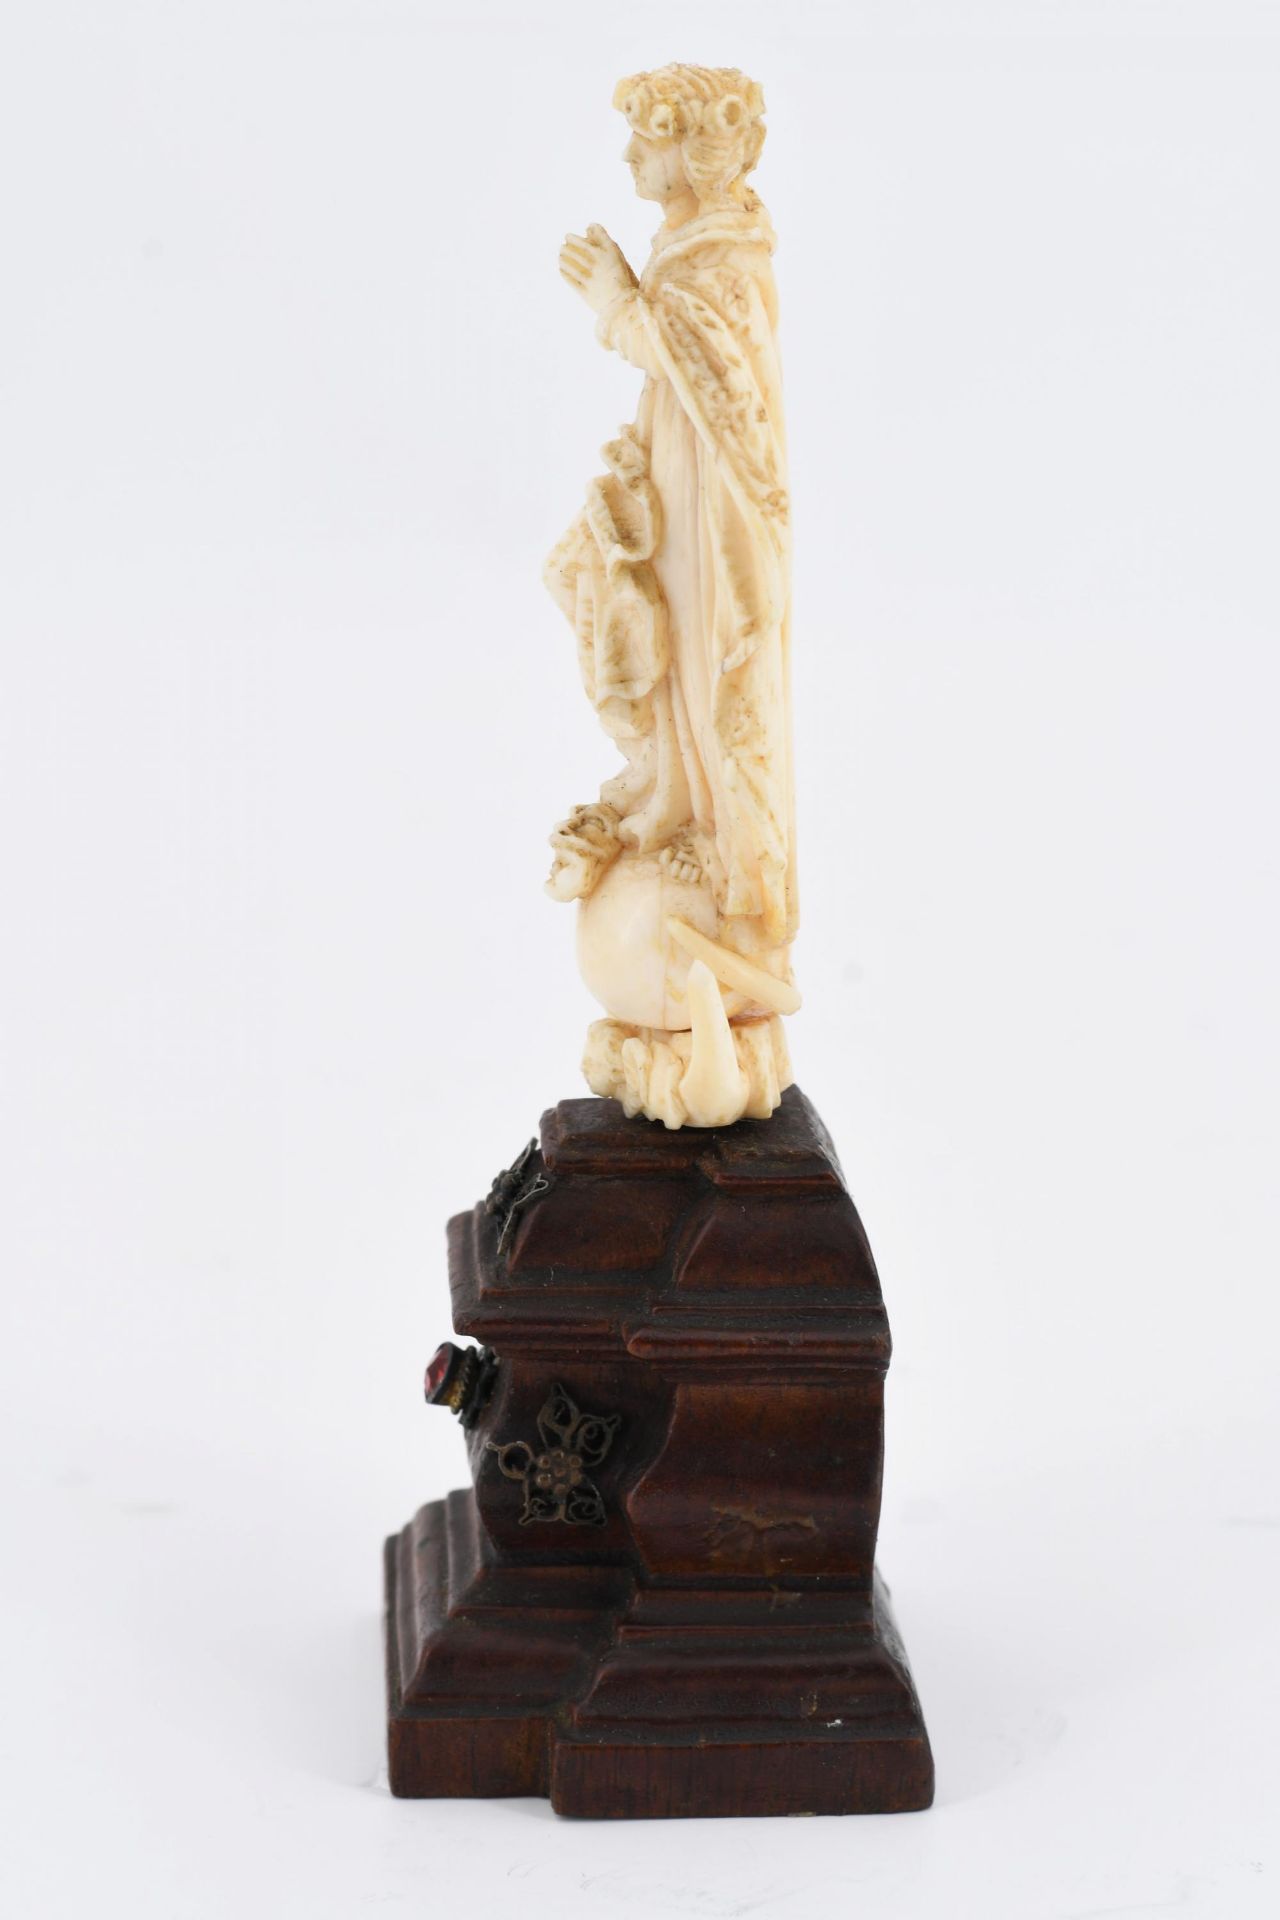 Ivory Madonna on a crescent moon - Image 3 of 6